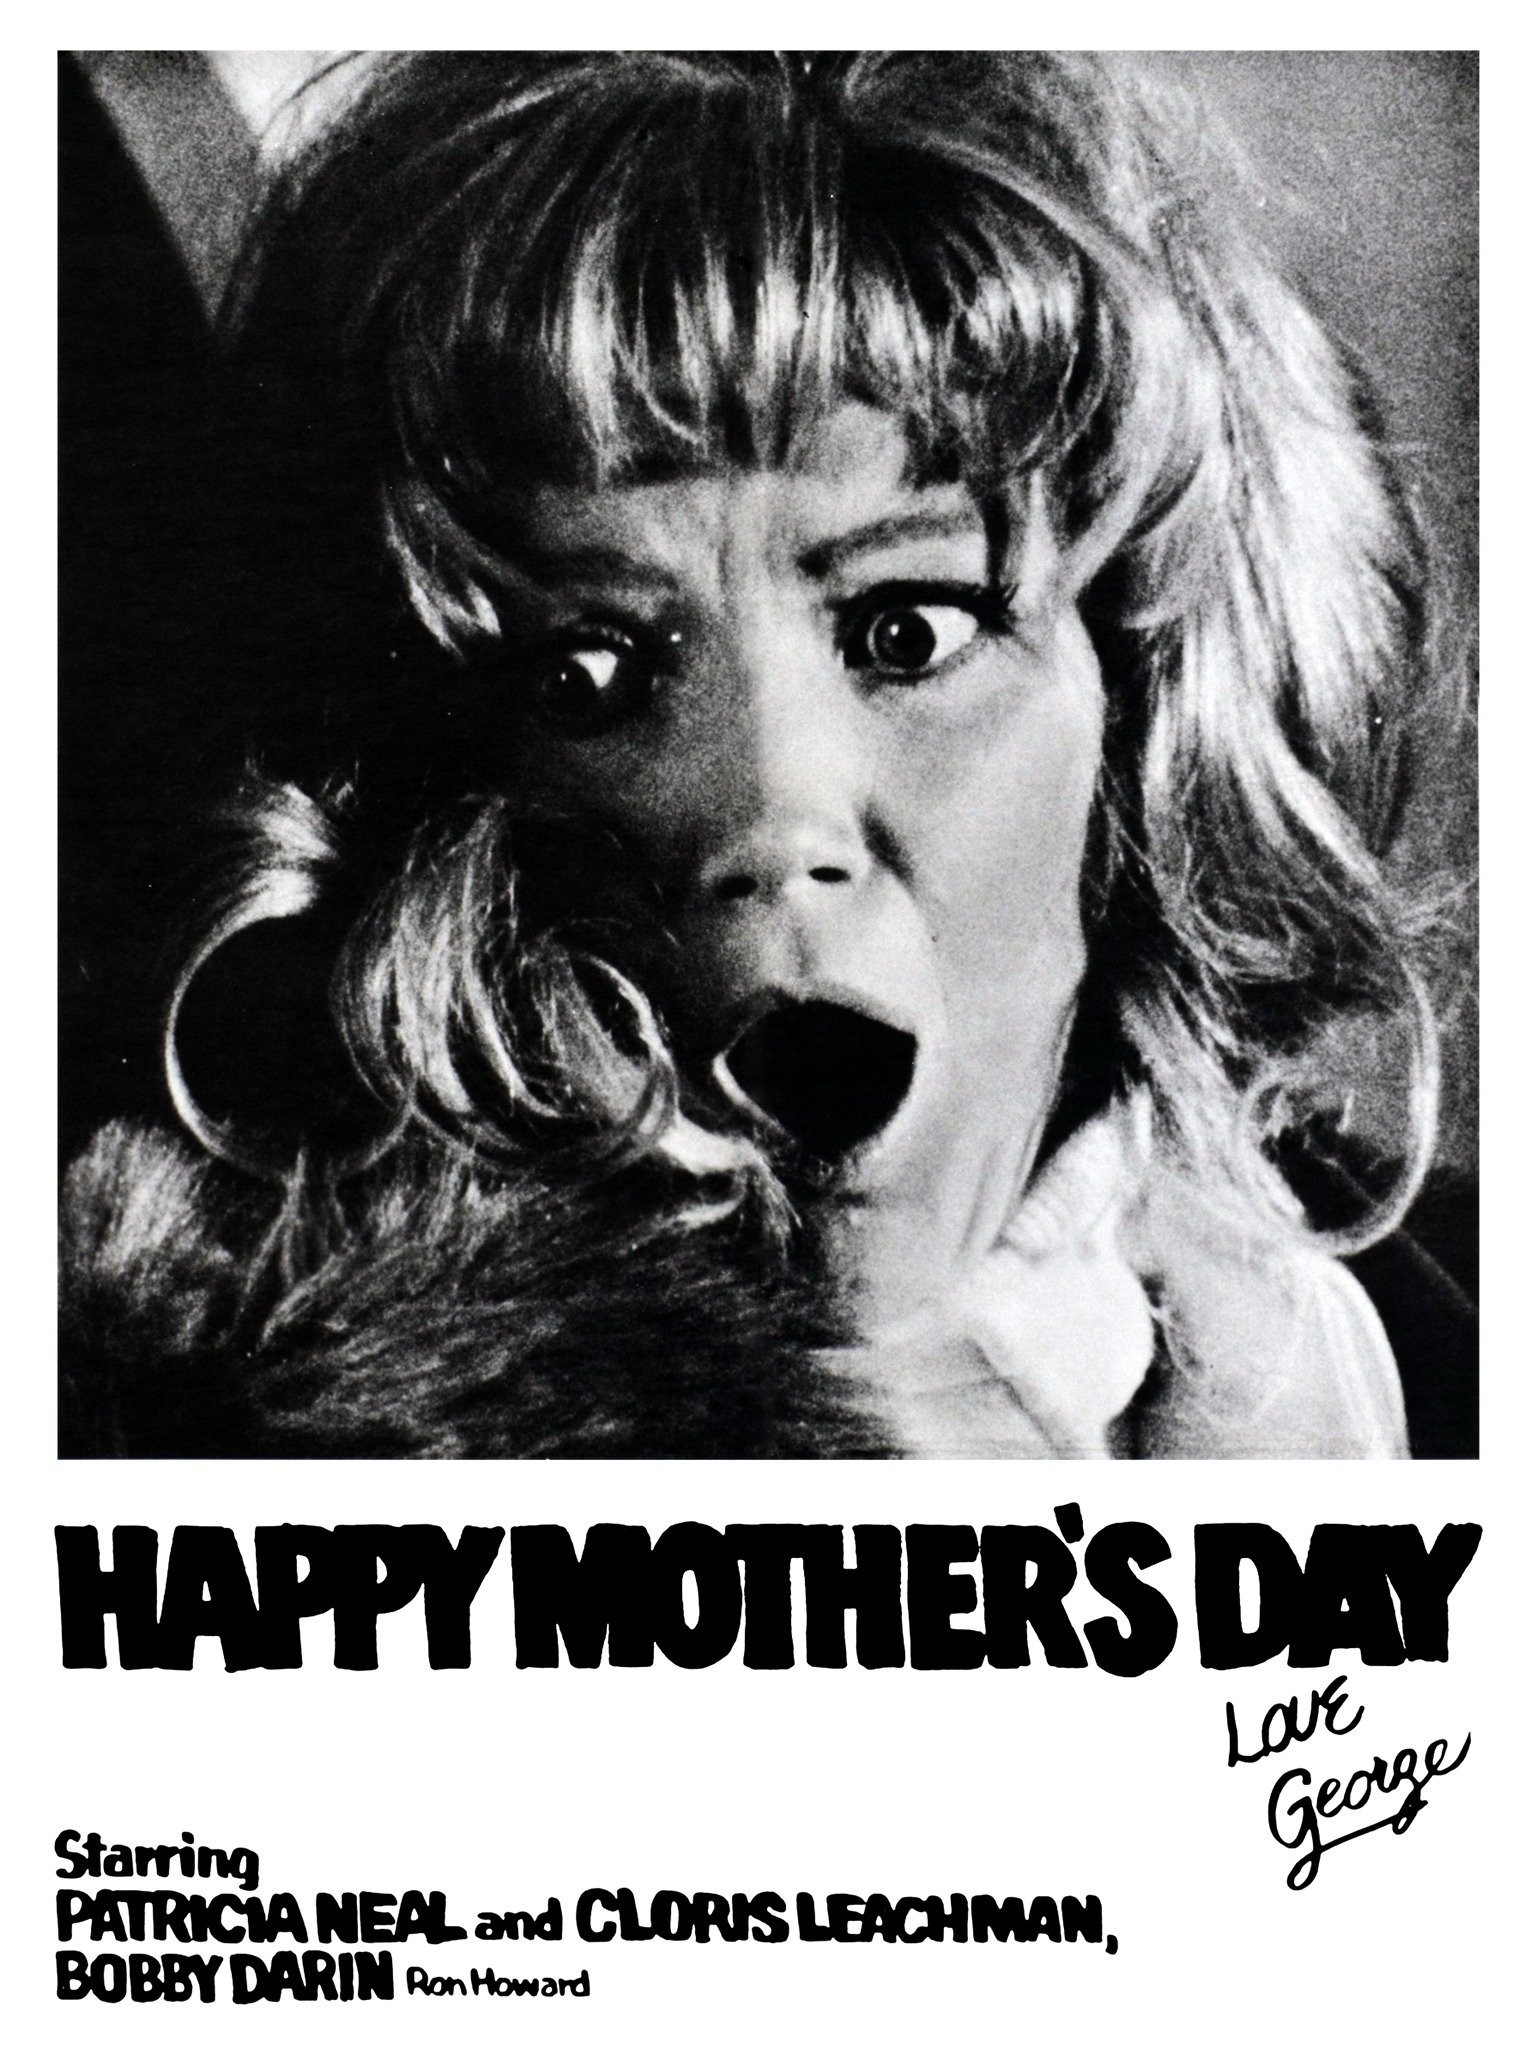 Mother's Day - Rotten Tomatoes